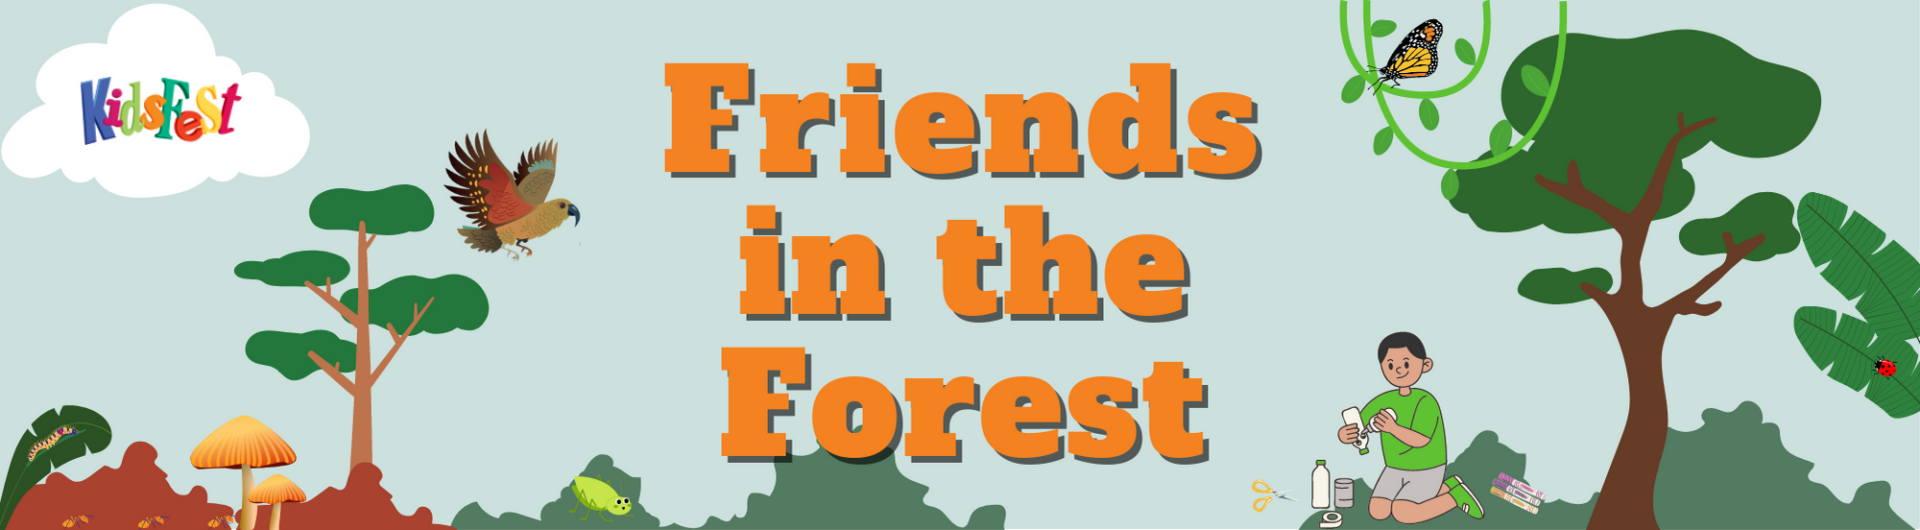 Image of Friends in the Forest event